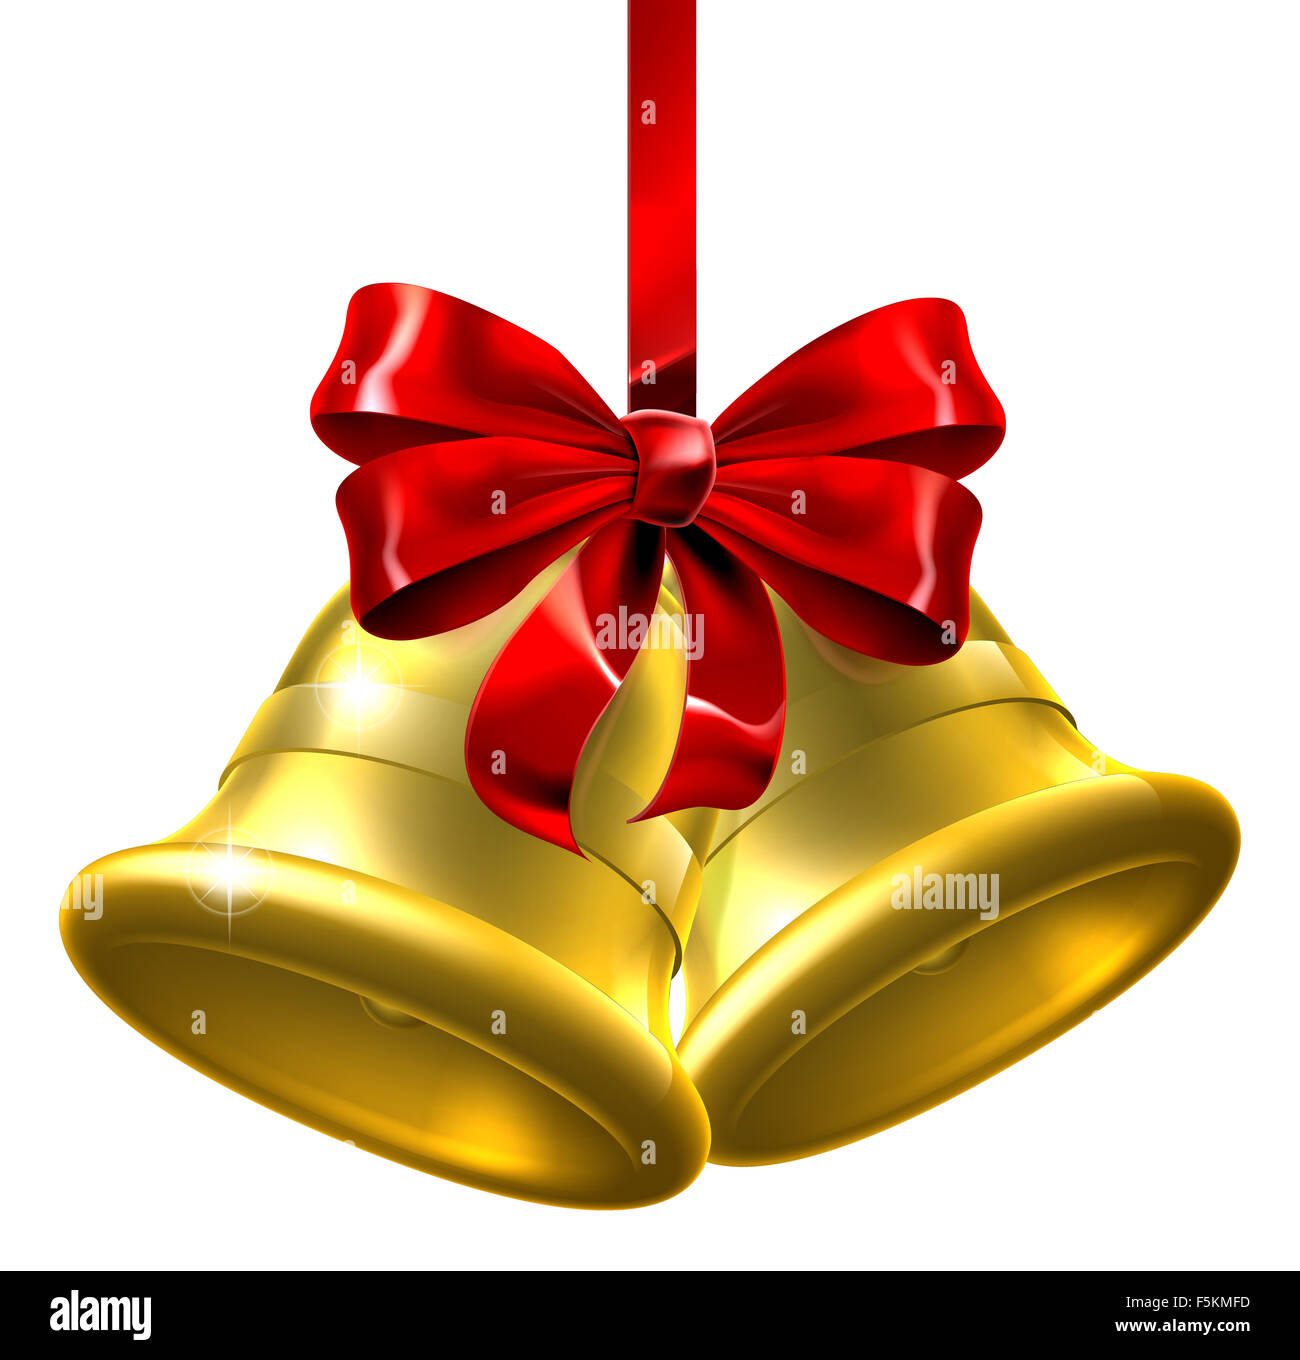 An illustration of a pair of gold Christmas bells wiith a red bow ...